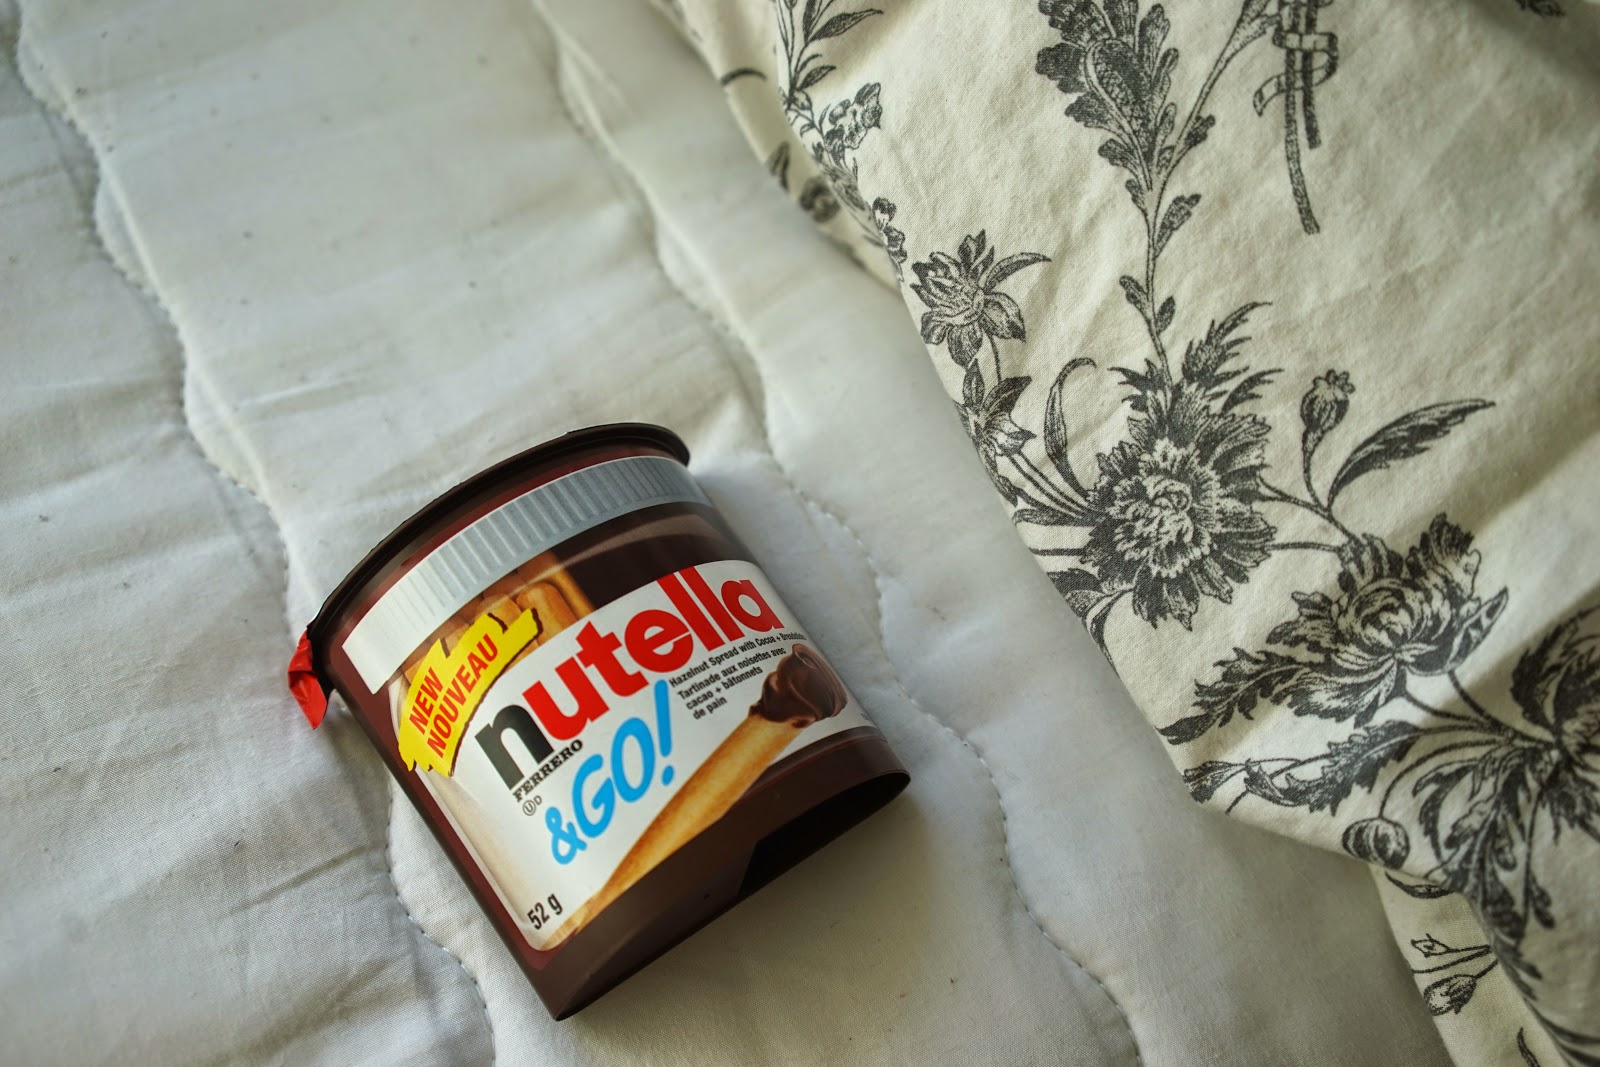 nutella and go